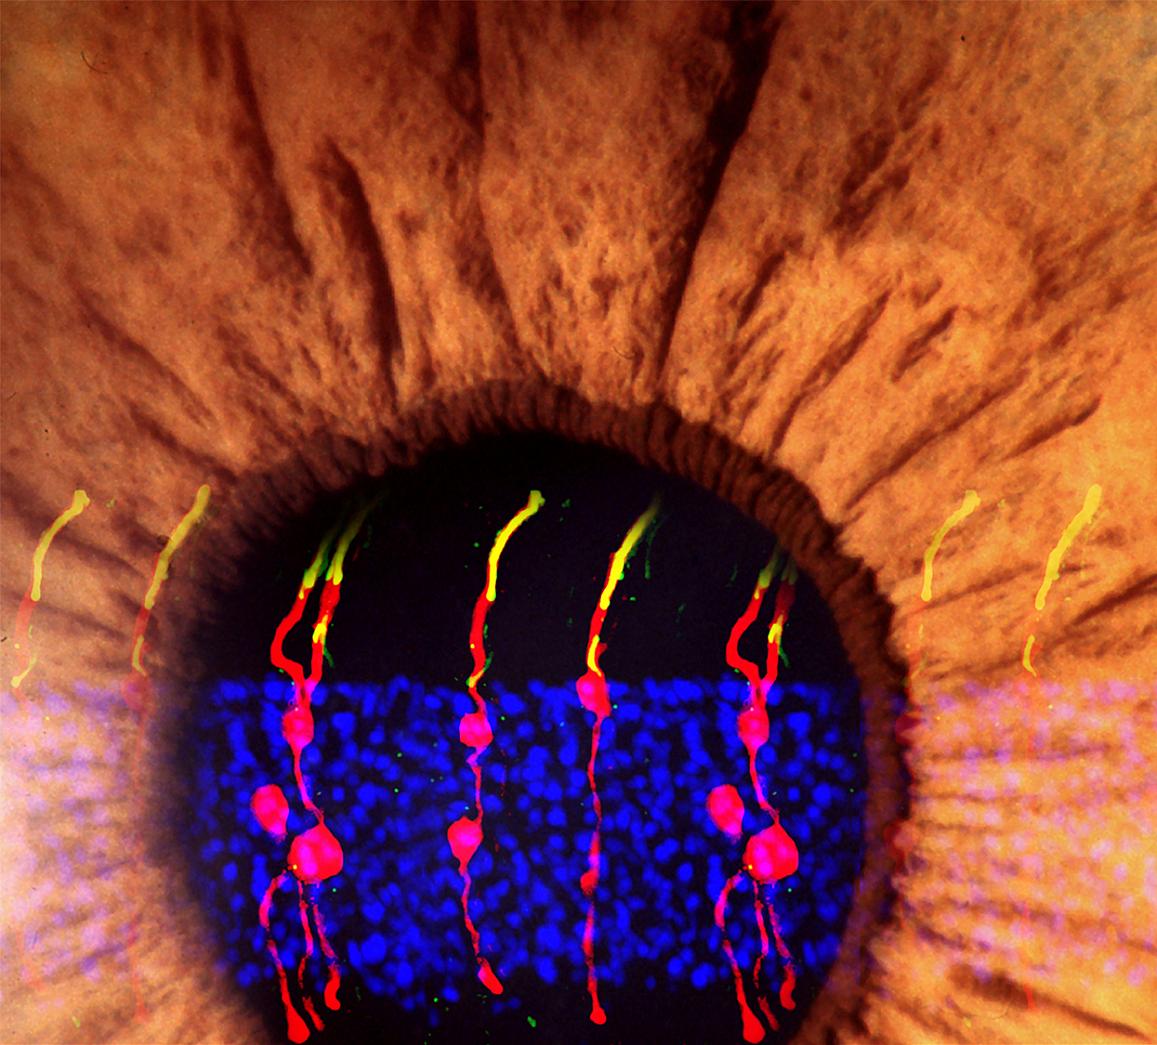 Researchers have reversed congenital blindness in mice